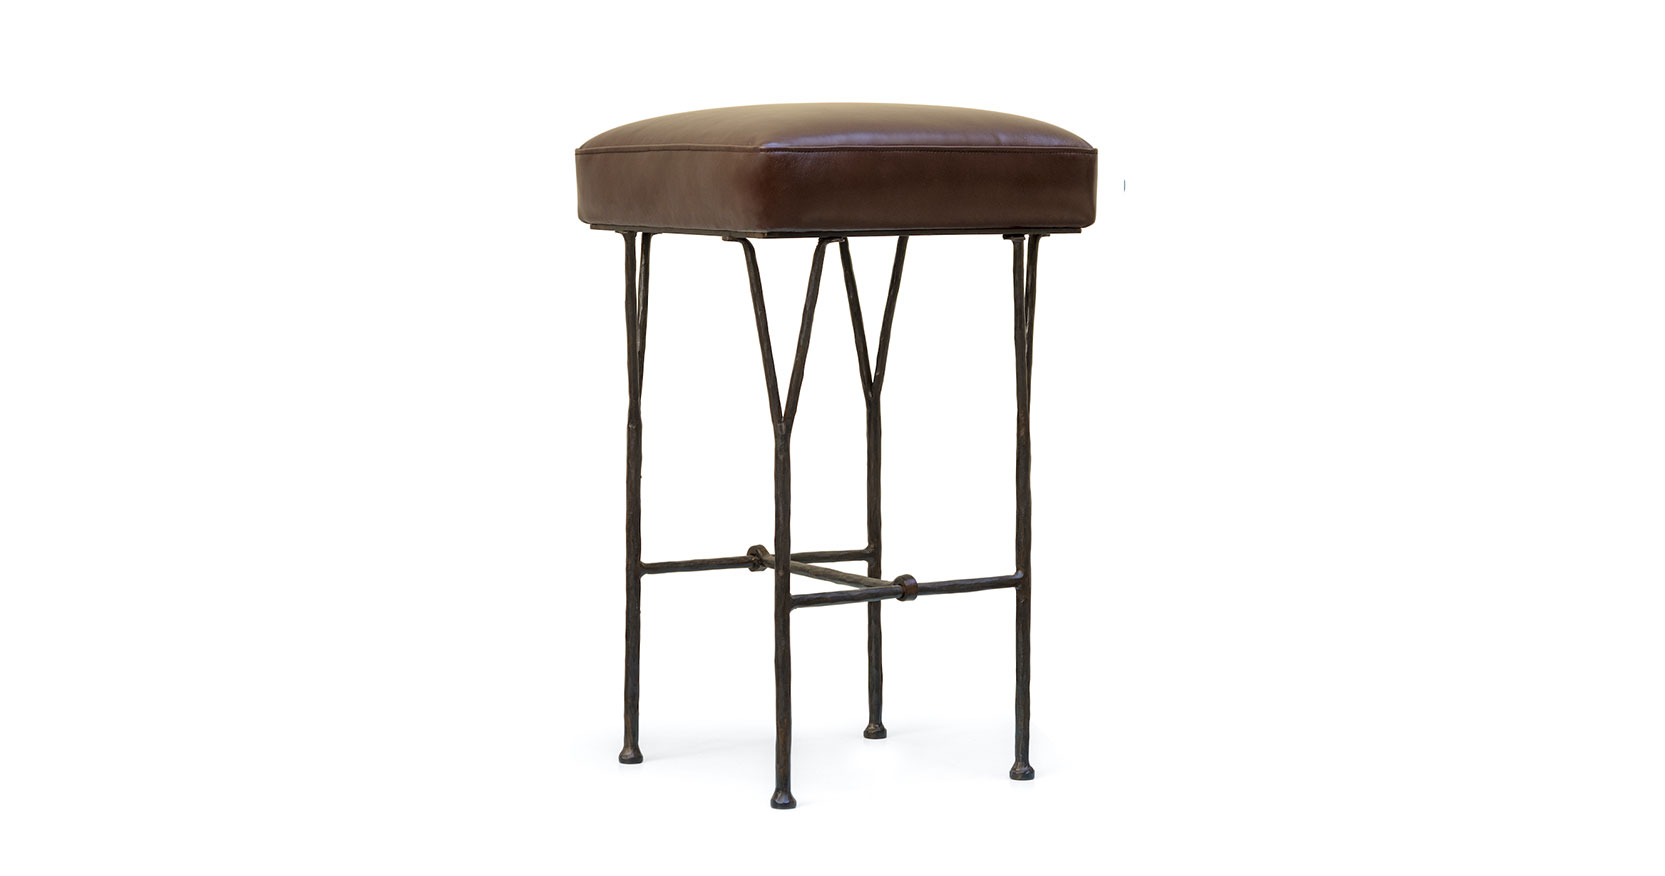 Garouste Bonetti, minimalist bar stool with black wrought iron legs that split upwards into forks and a brown leather seat